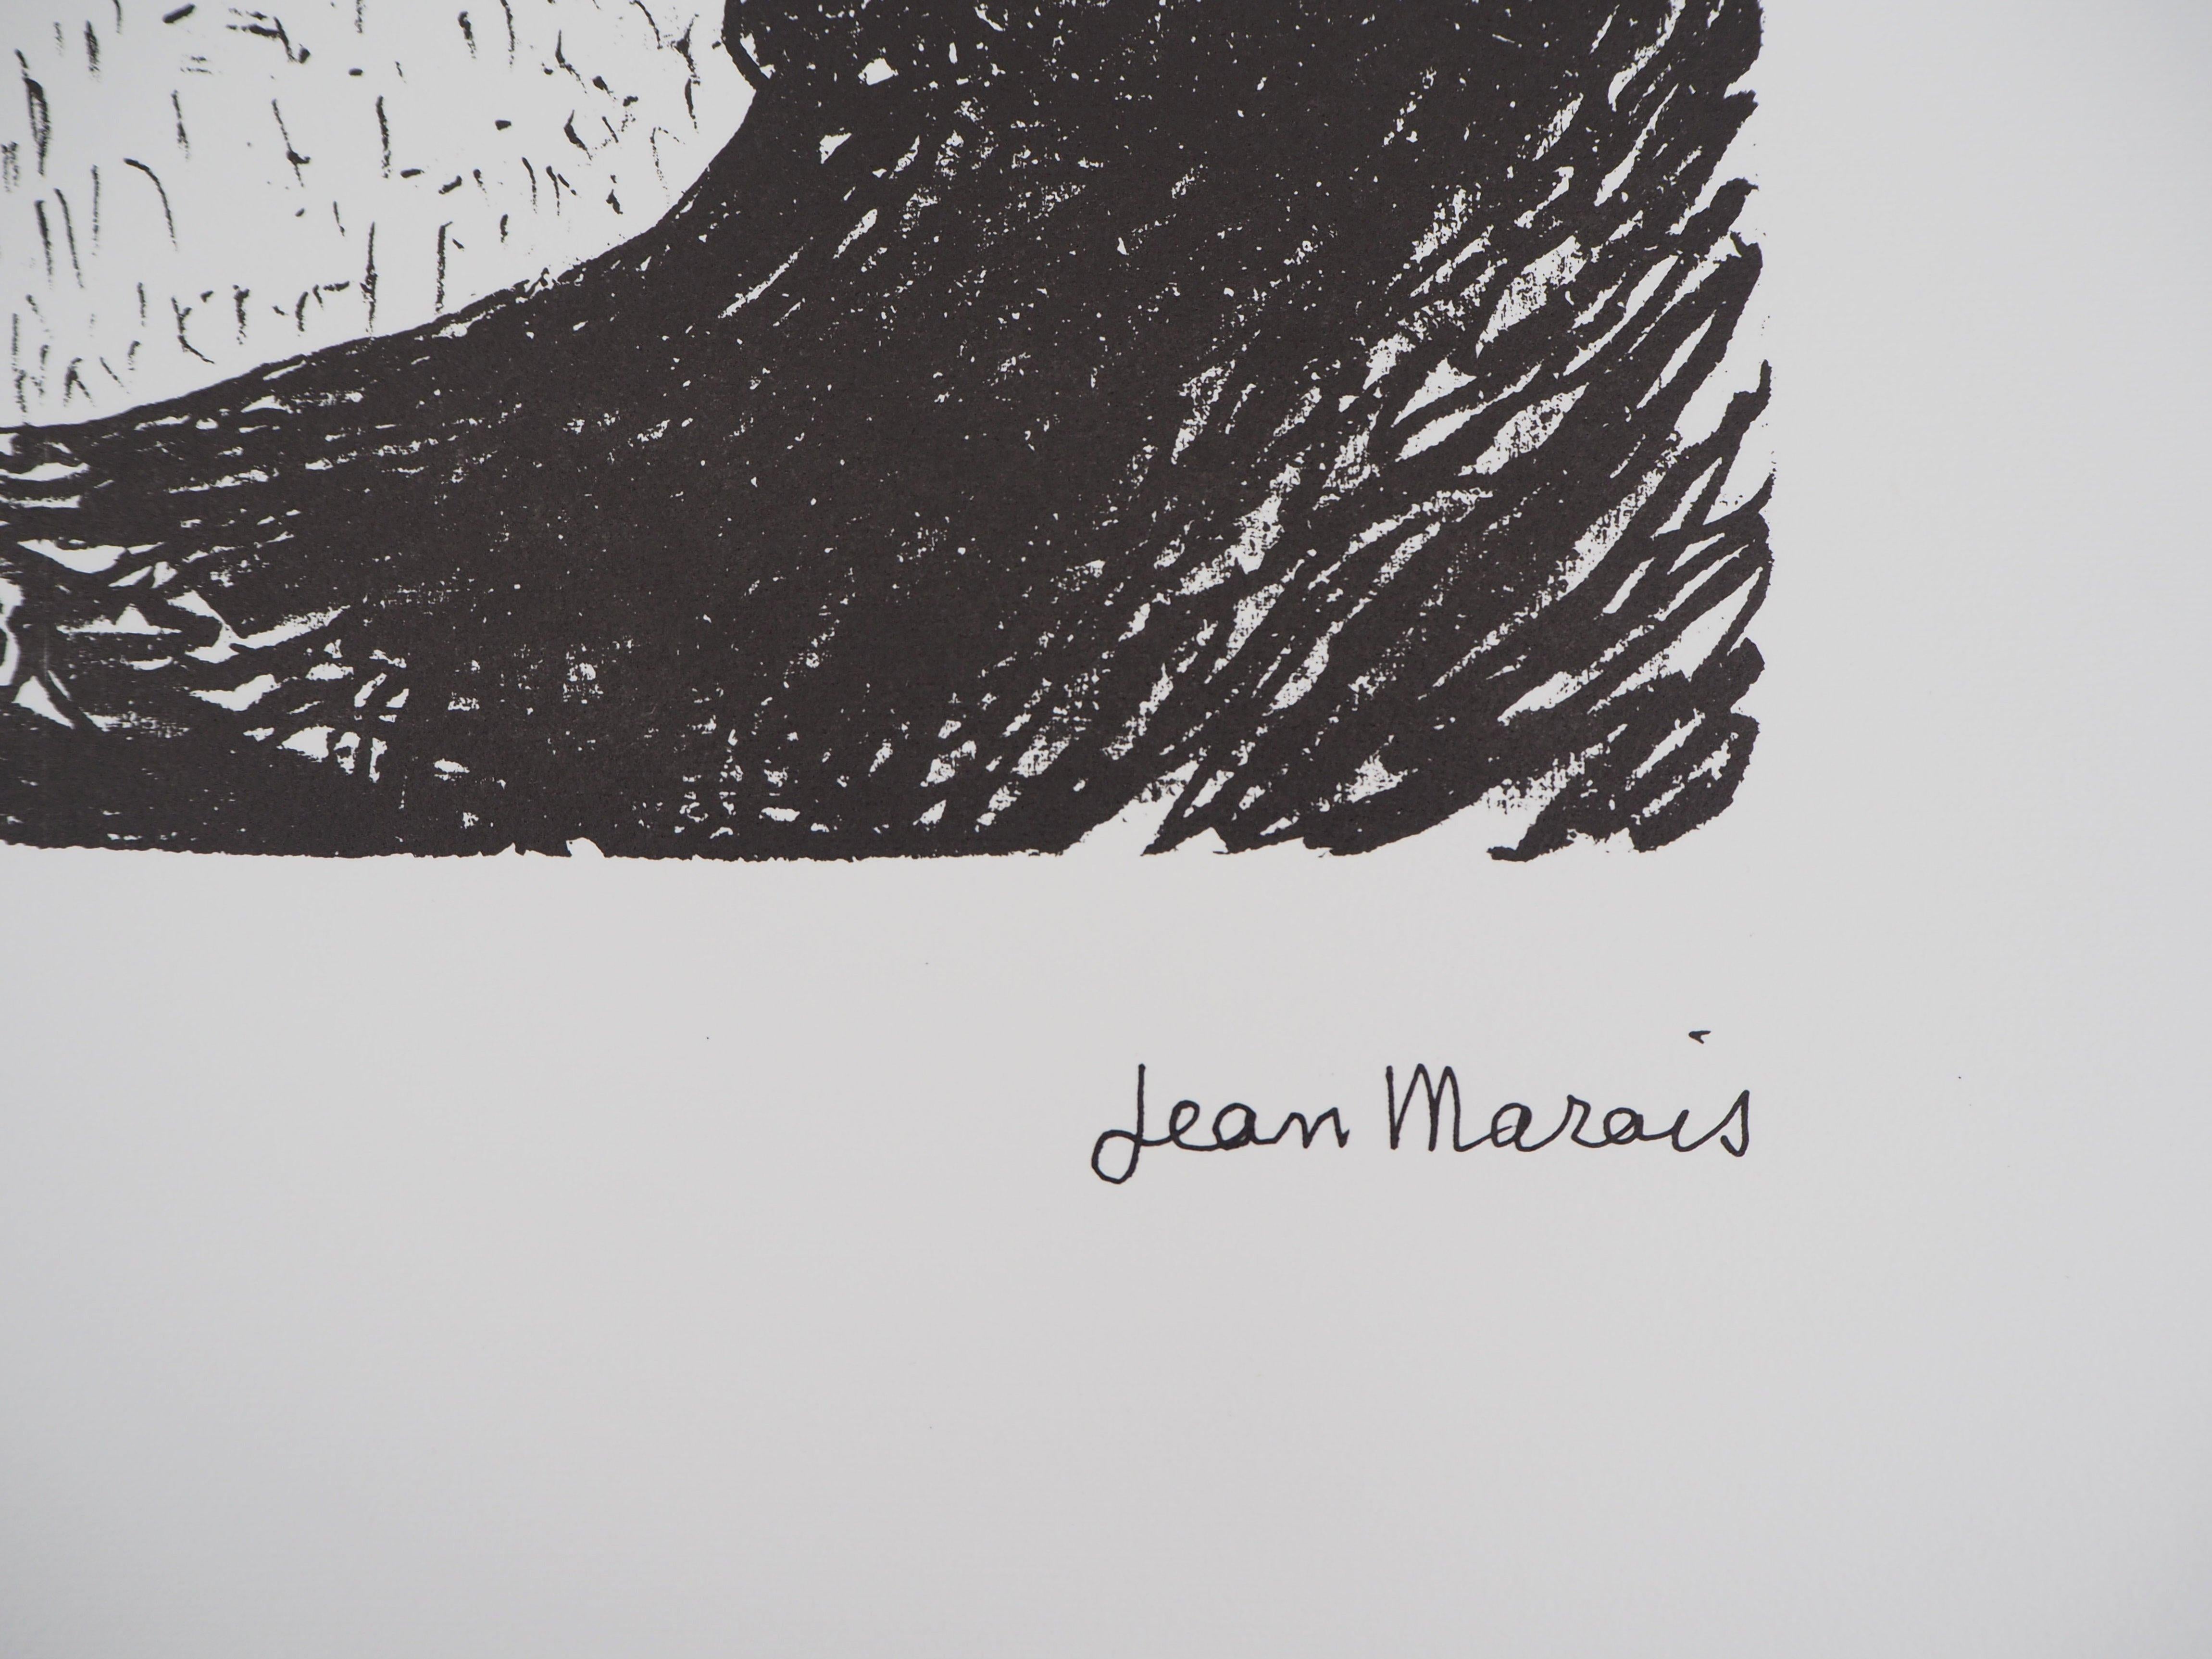 Jean Marais (1913 - 1998)
Surrealist Landscape : Faces of the Forrest

Original lithograph
Signed with the stamp of the artist
Bears also a printed signature in the plate
Numbered /100
On vellum 65 x 45 cm (c. 26 x 18 inch)

Excellent